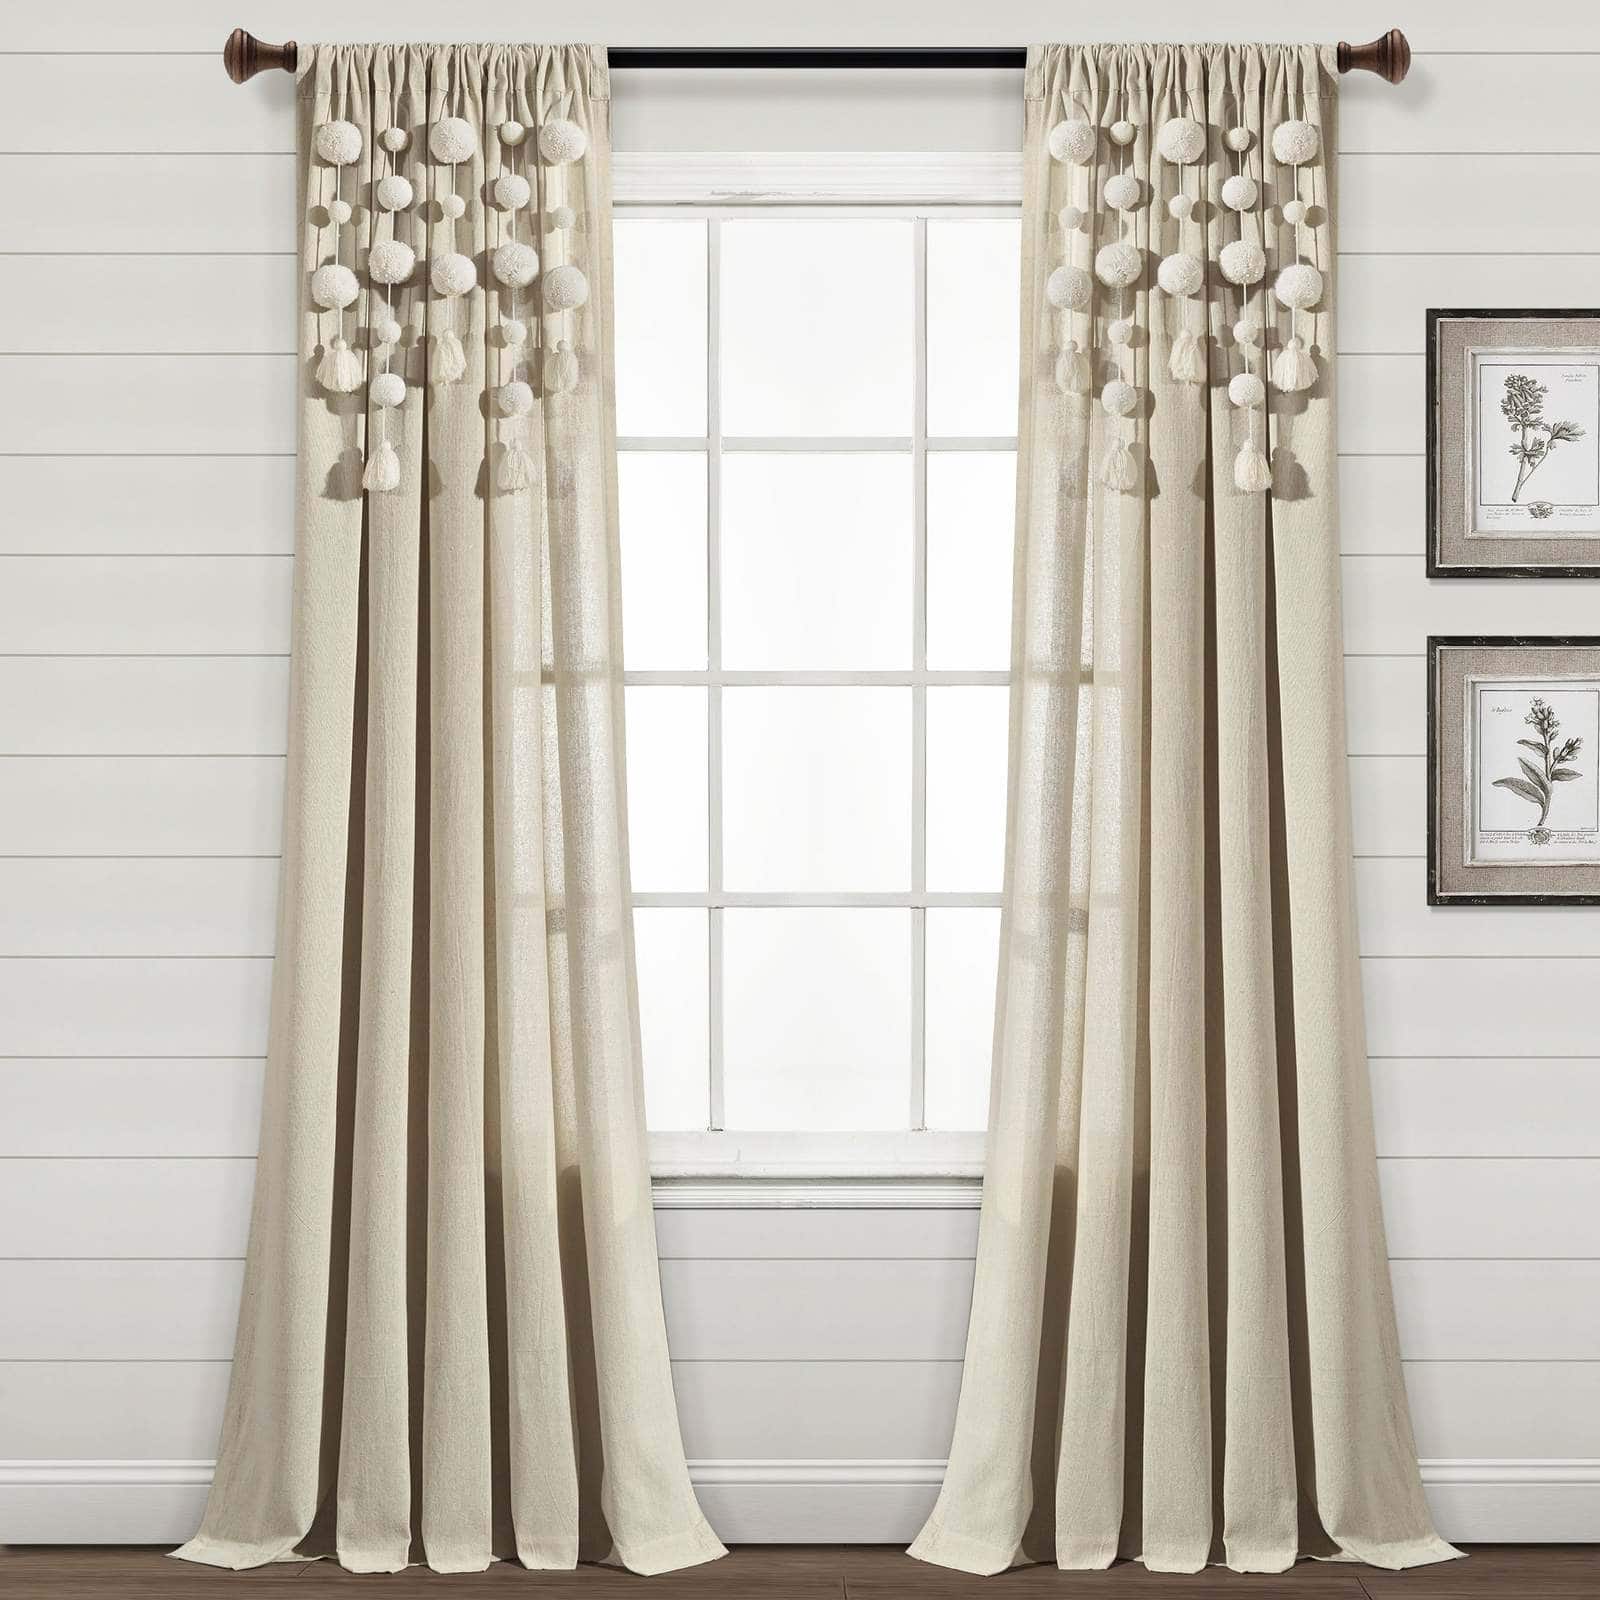 Accent Your Windows with Tassel Curtains